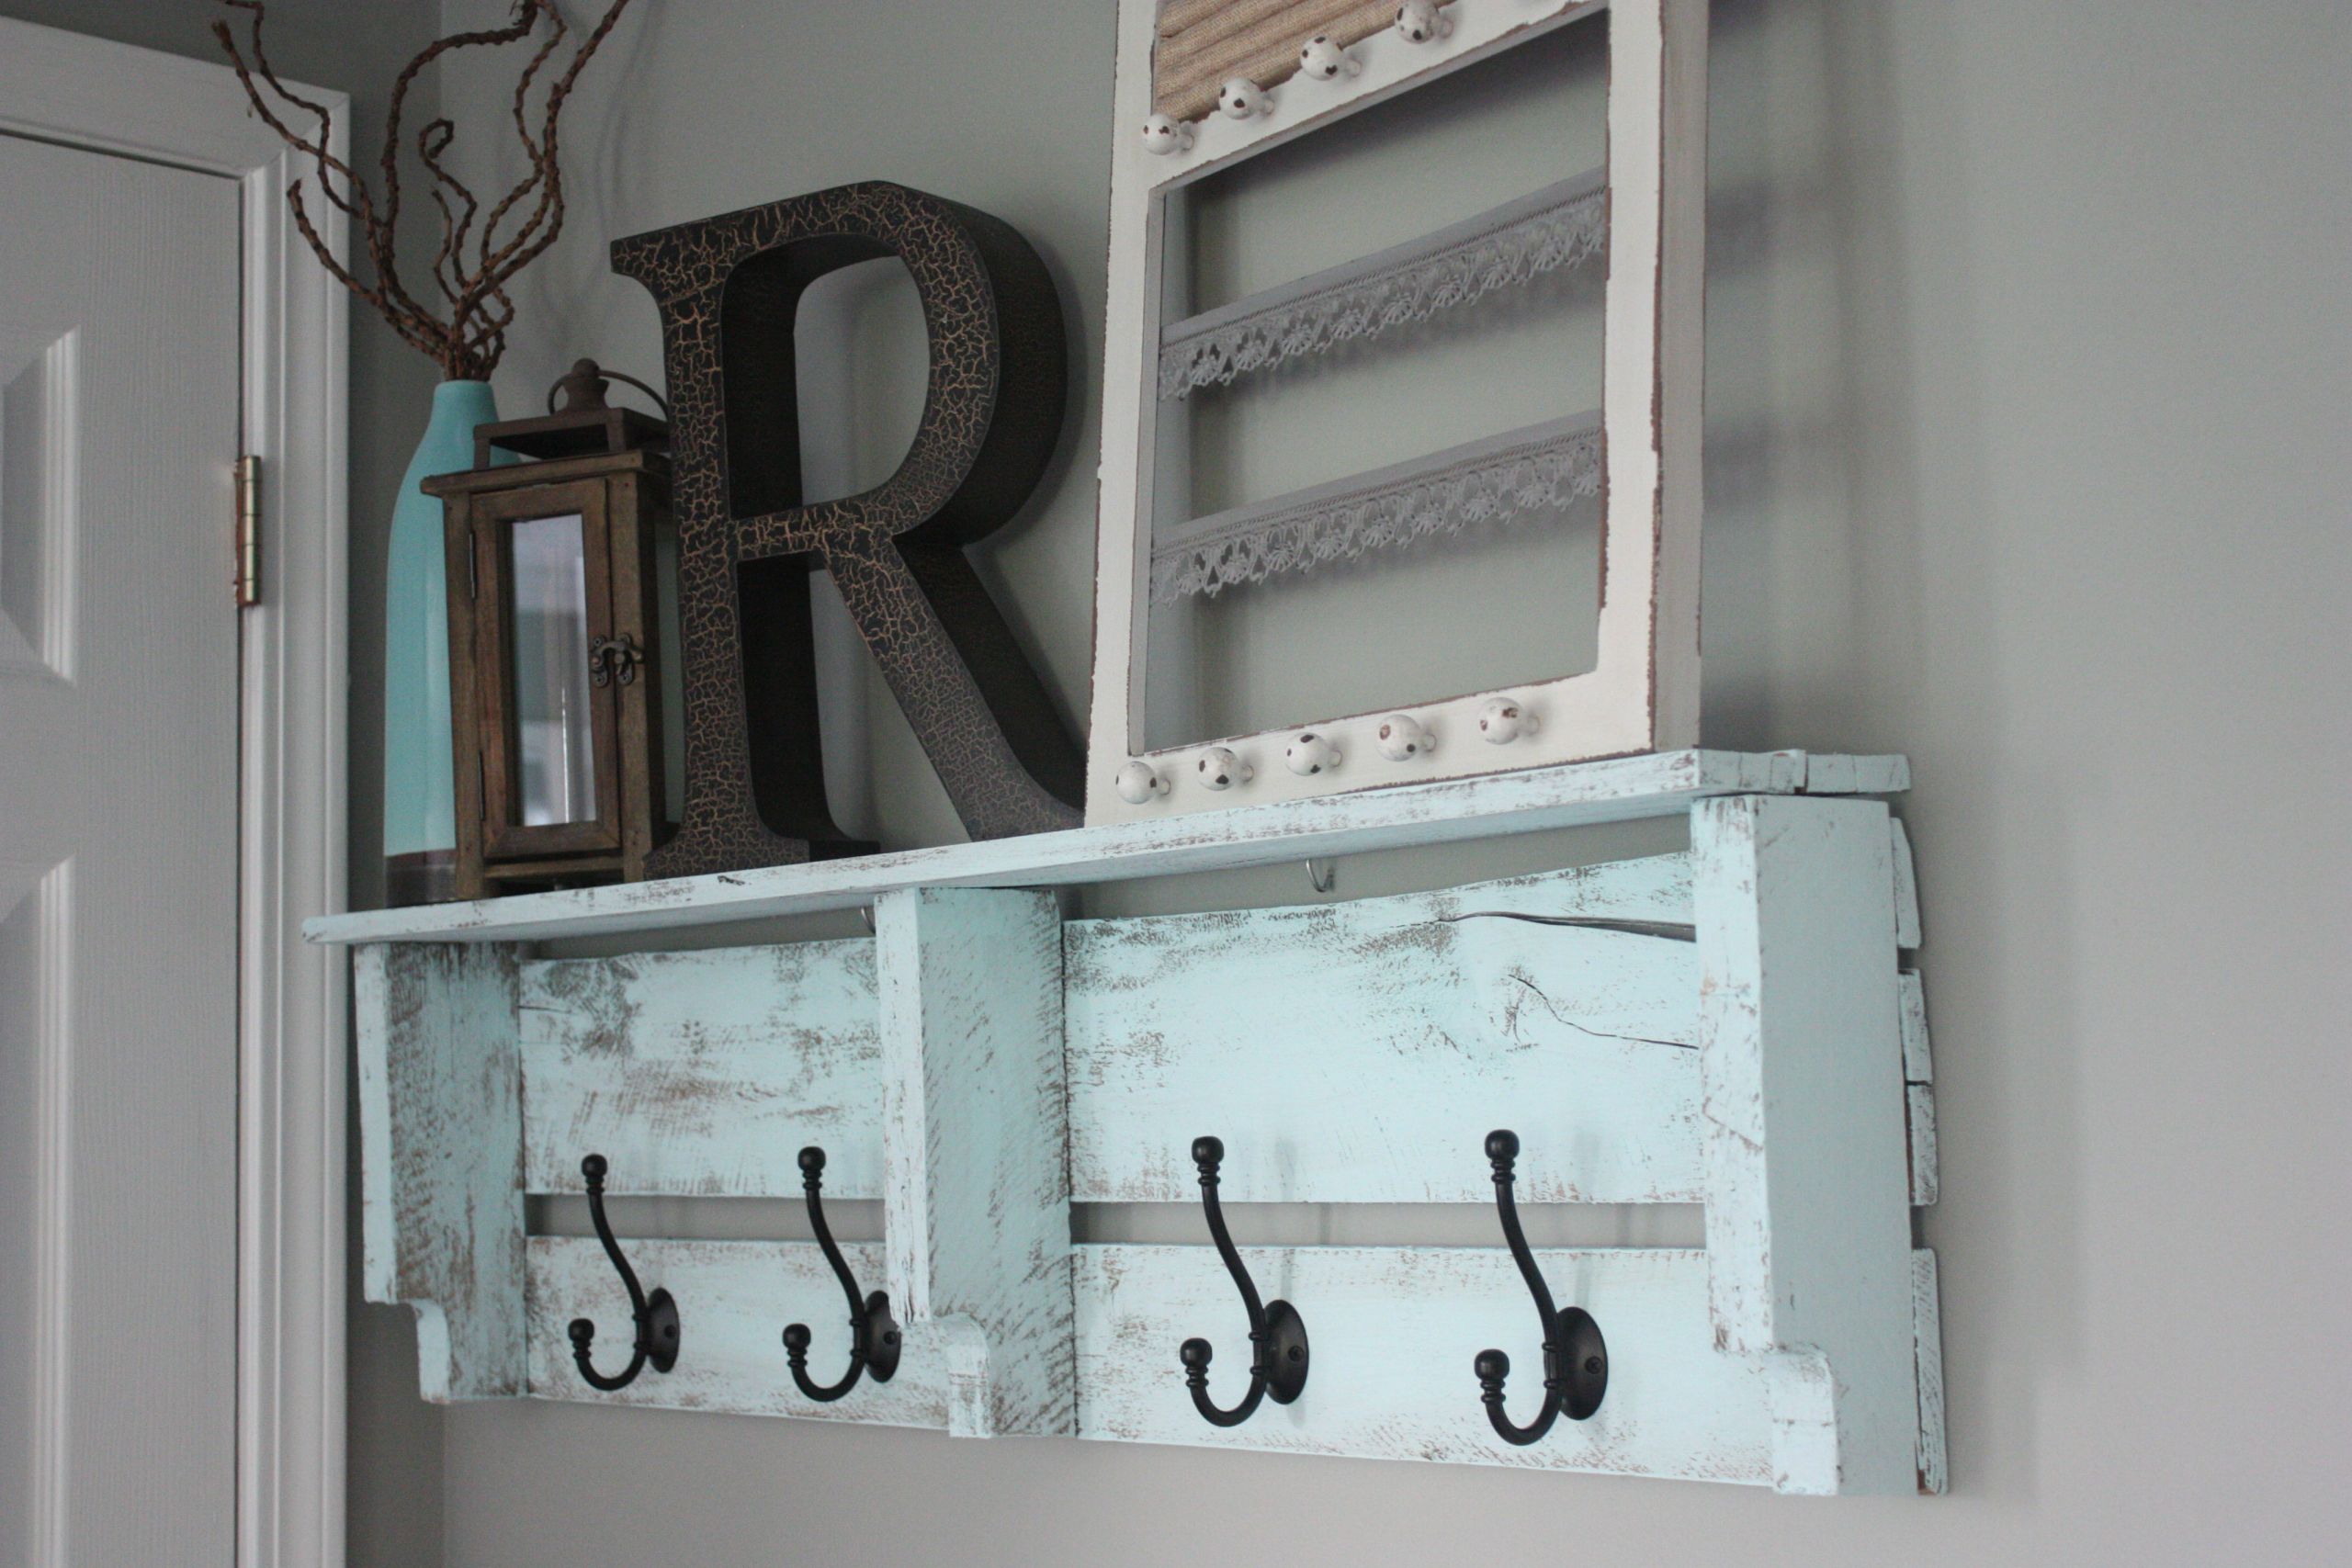 DIY Pallet Coat Rack
 Easy DIY Pallet Coat Rack Re Fabbed